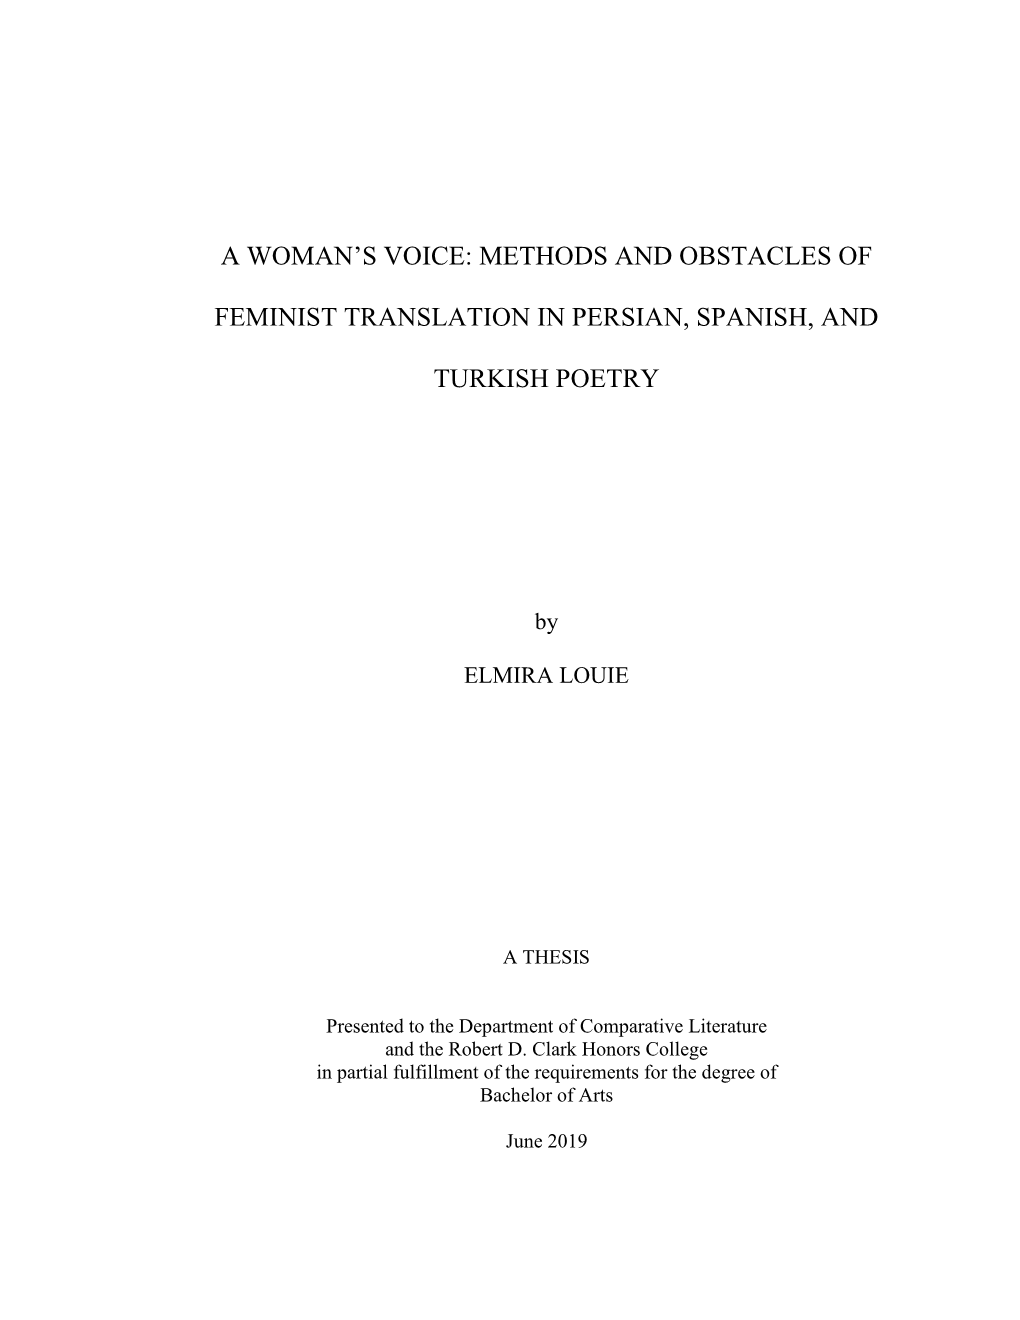 Methods and Obstacles of Feminist Translation in Persian, Spanish, and Turkish Poetry